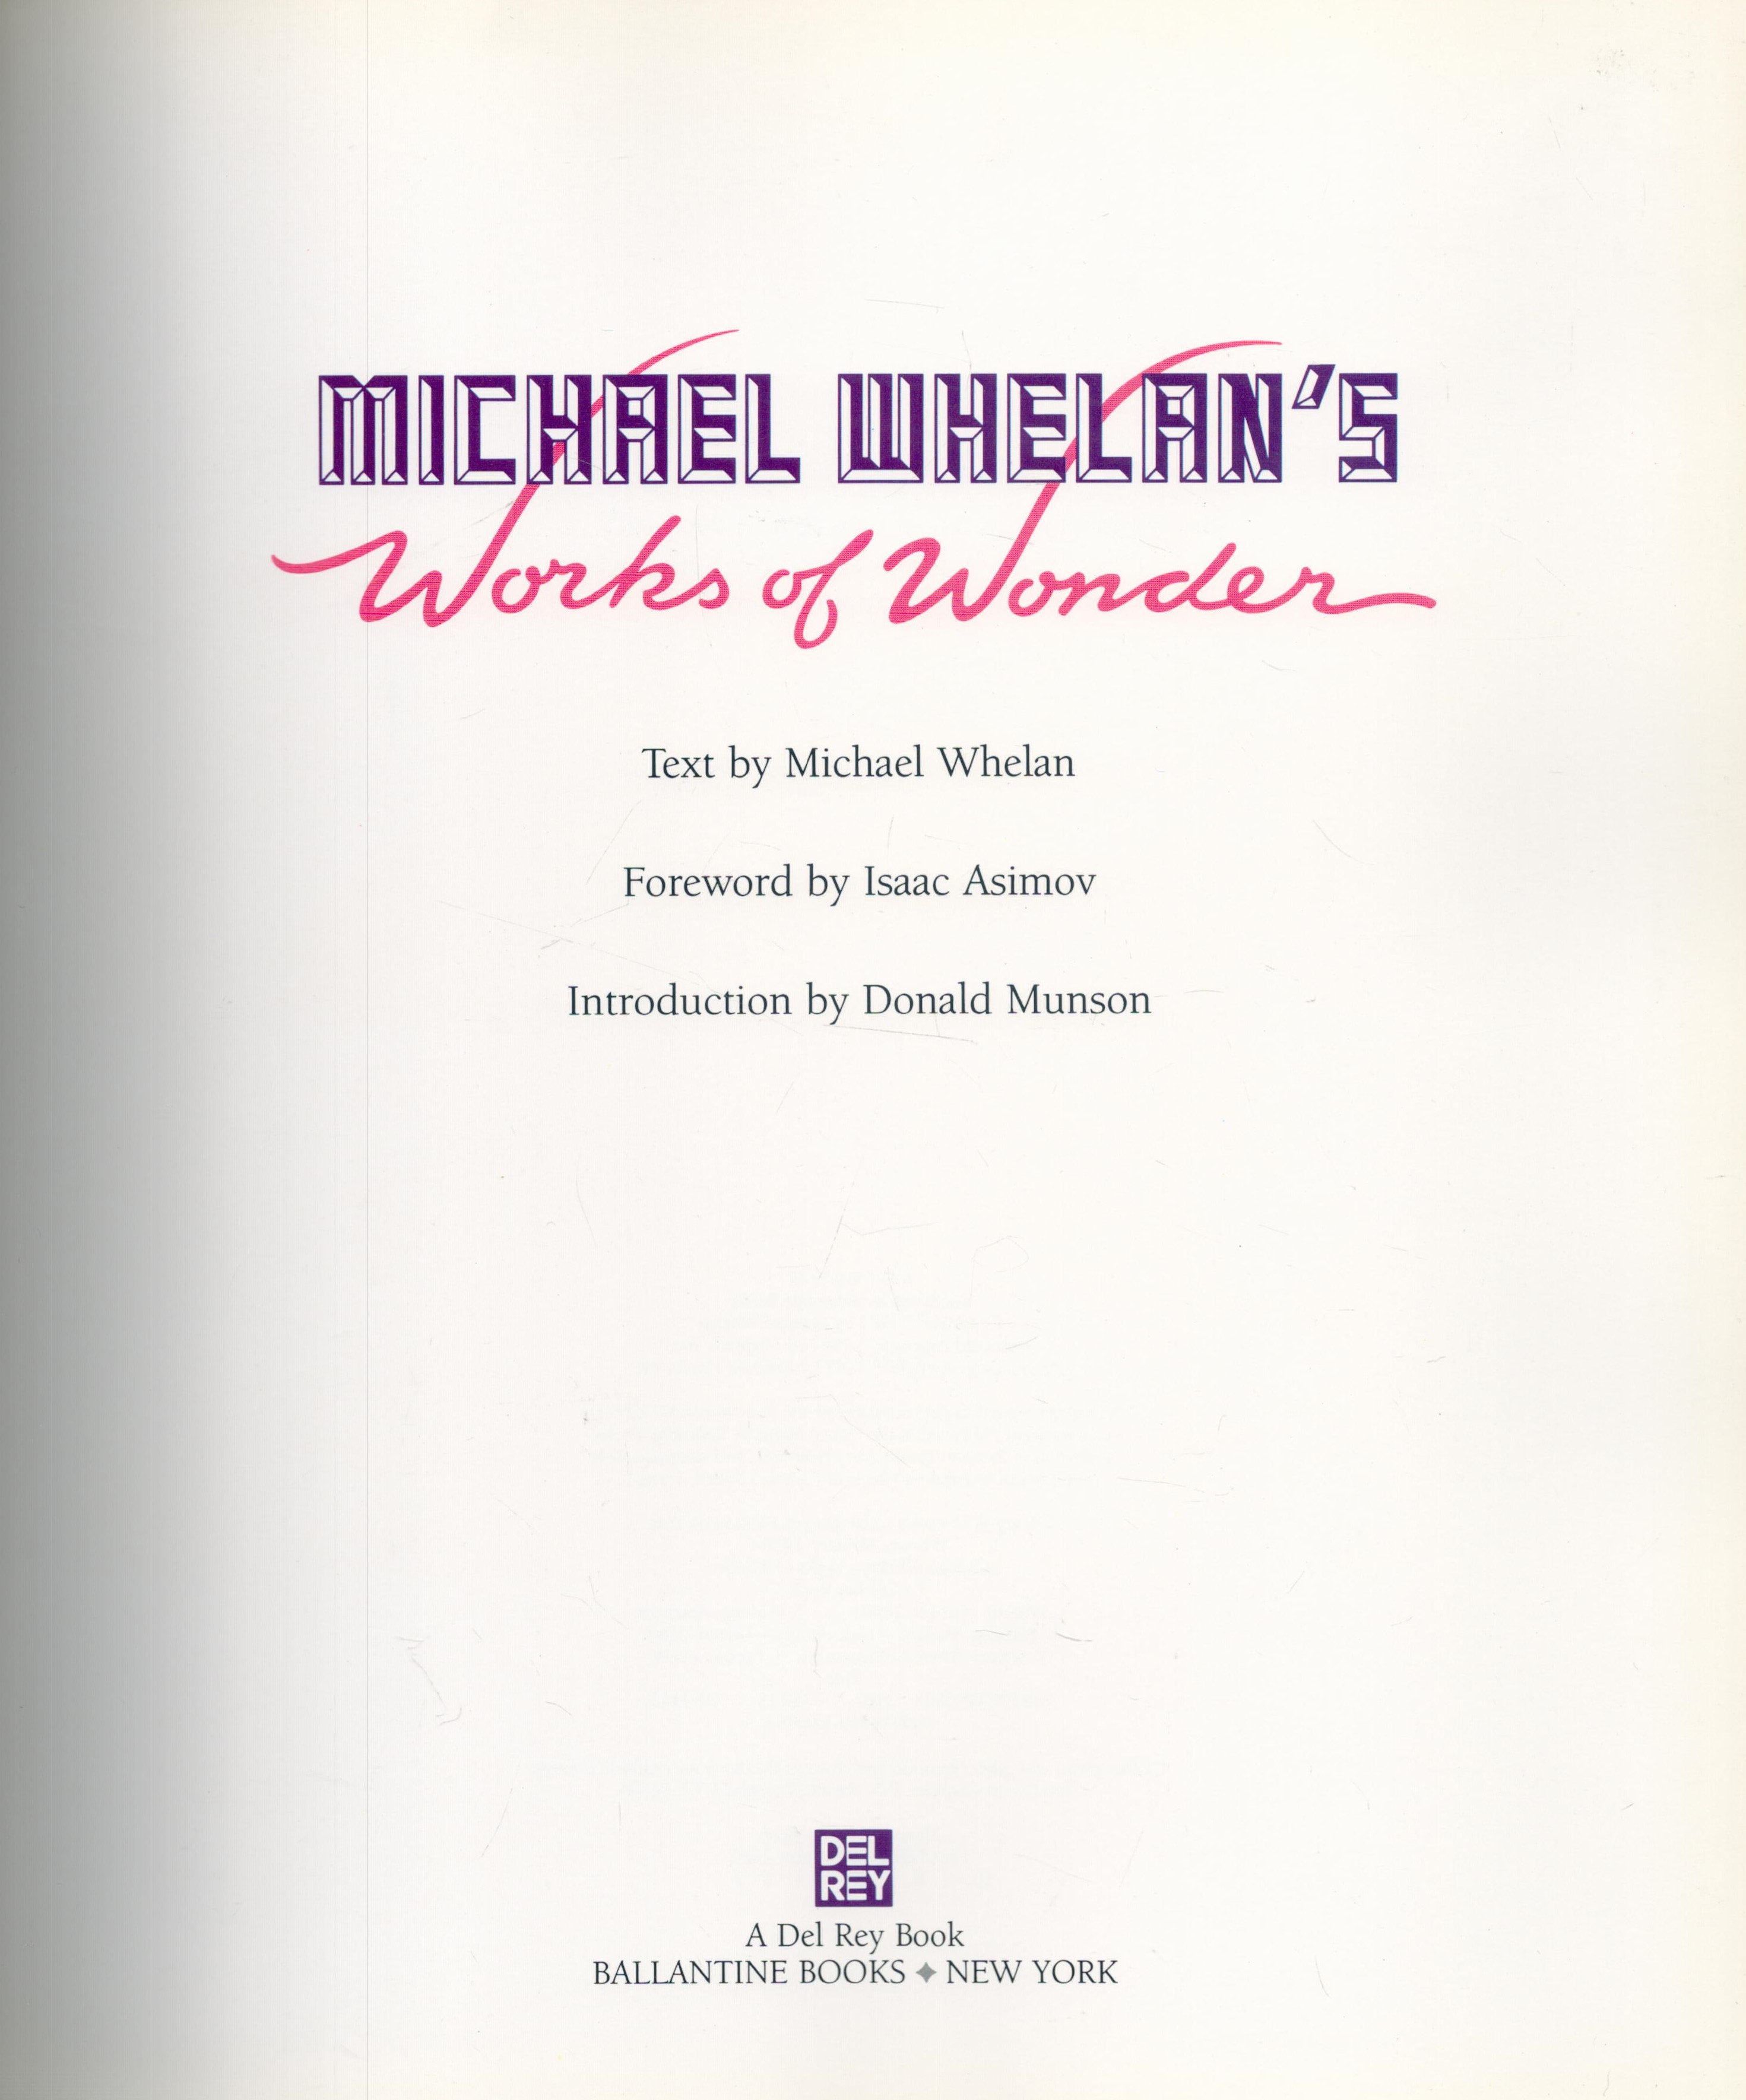 Michael Whelan's Works of Wonder by Michael Whelan 1987 First Edition Hardback Book with 109 pages - Image 2 of 3